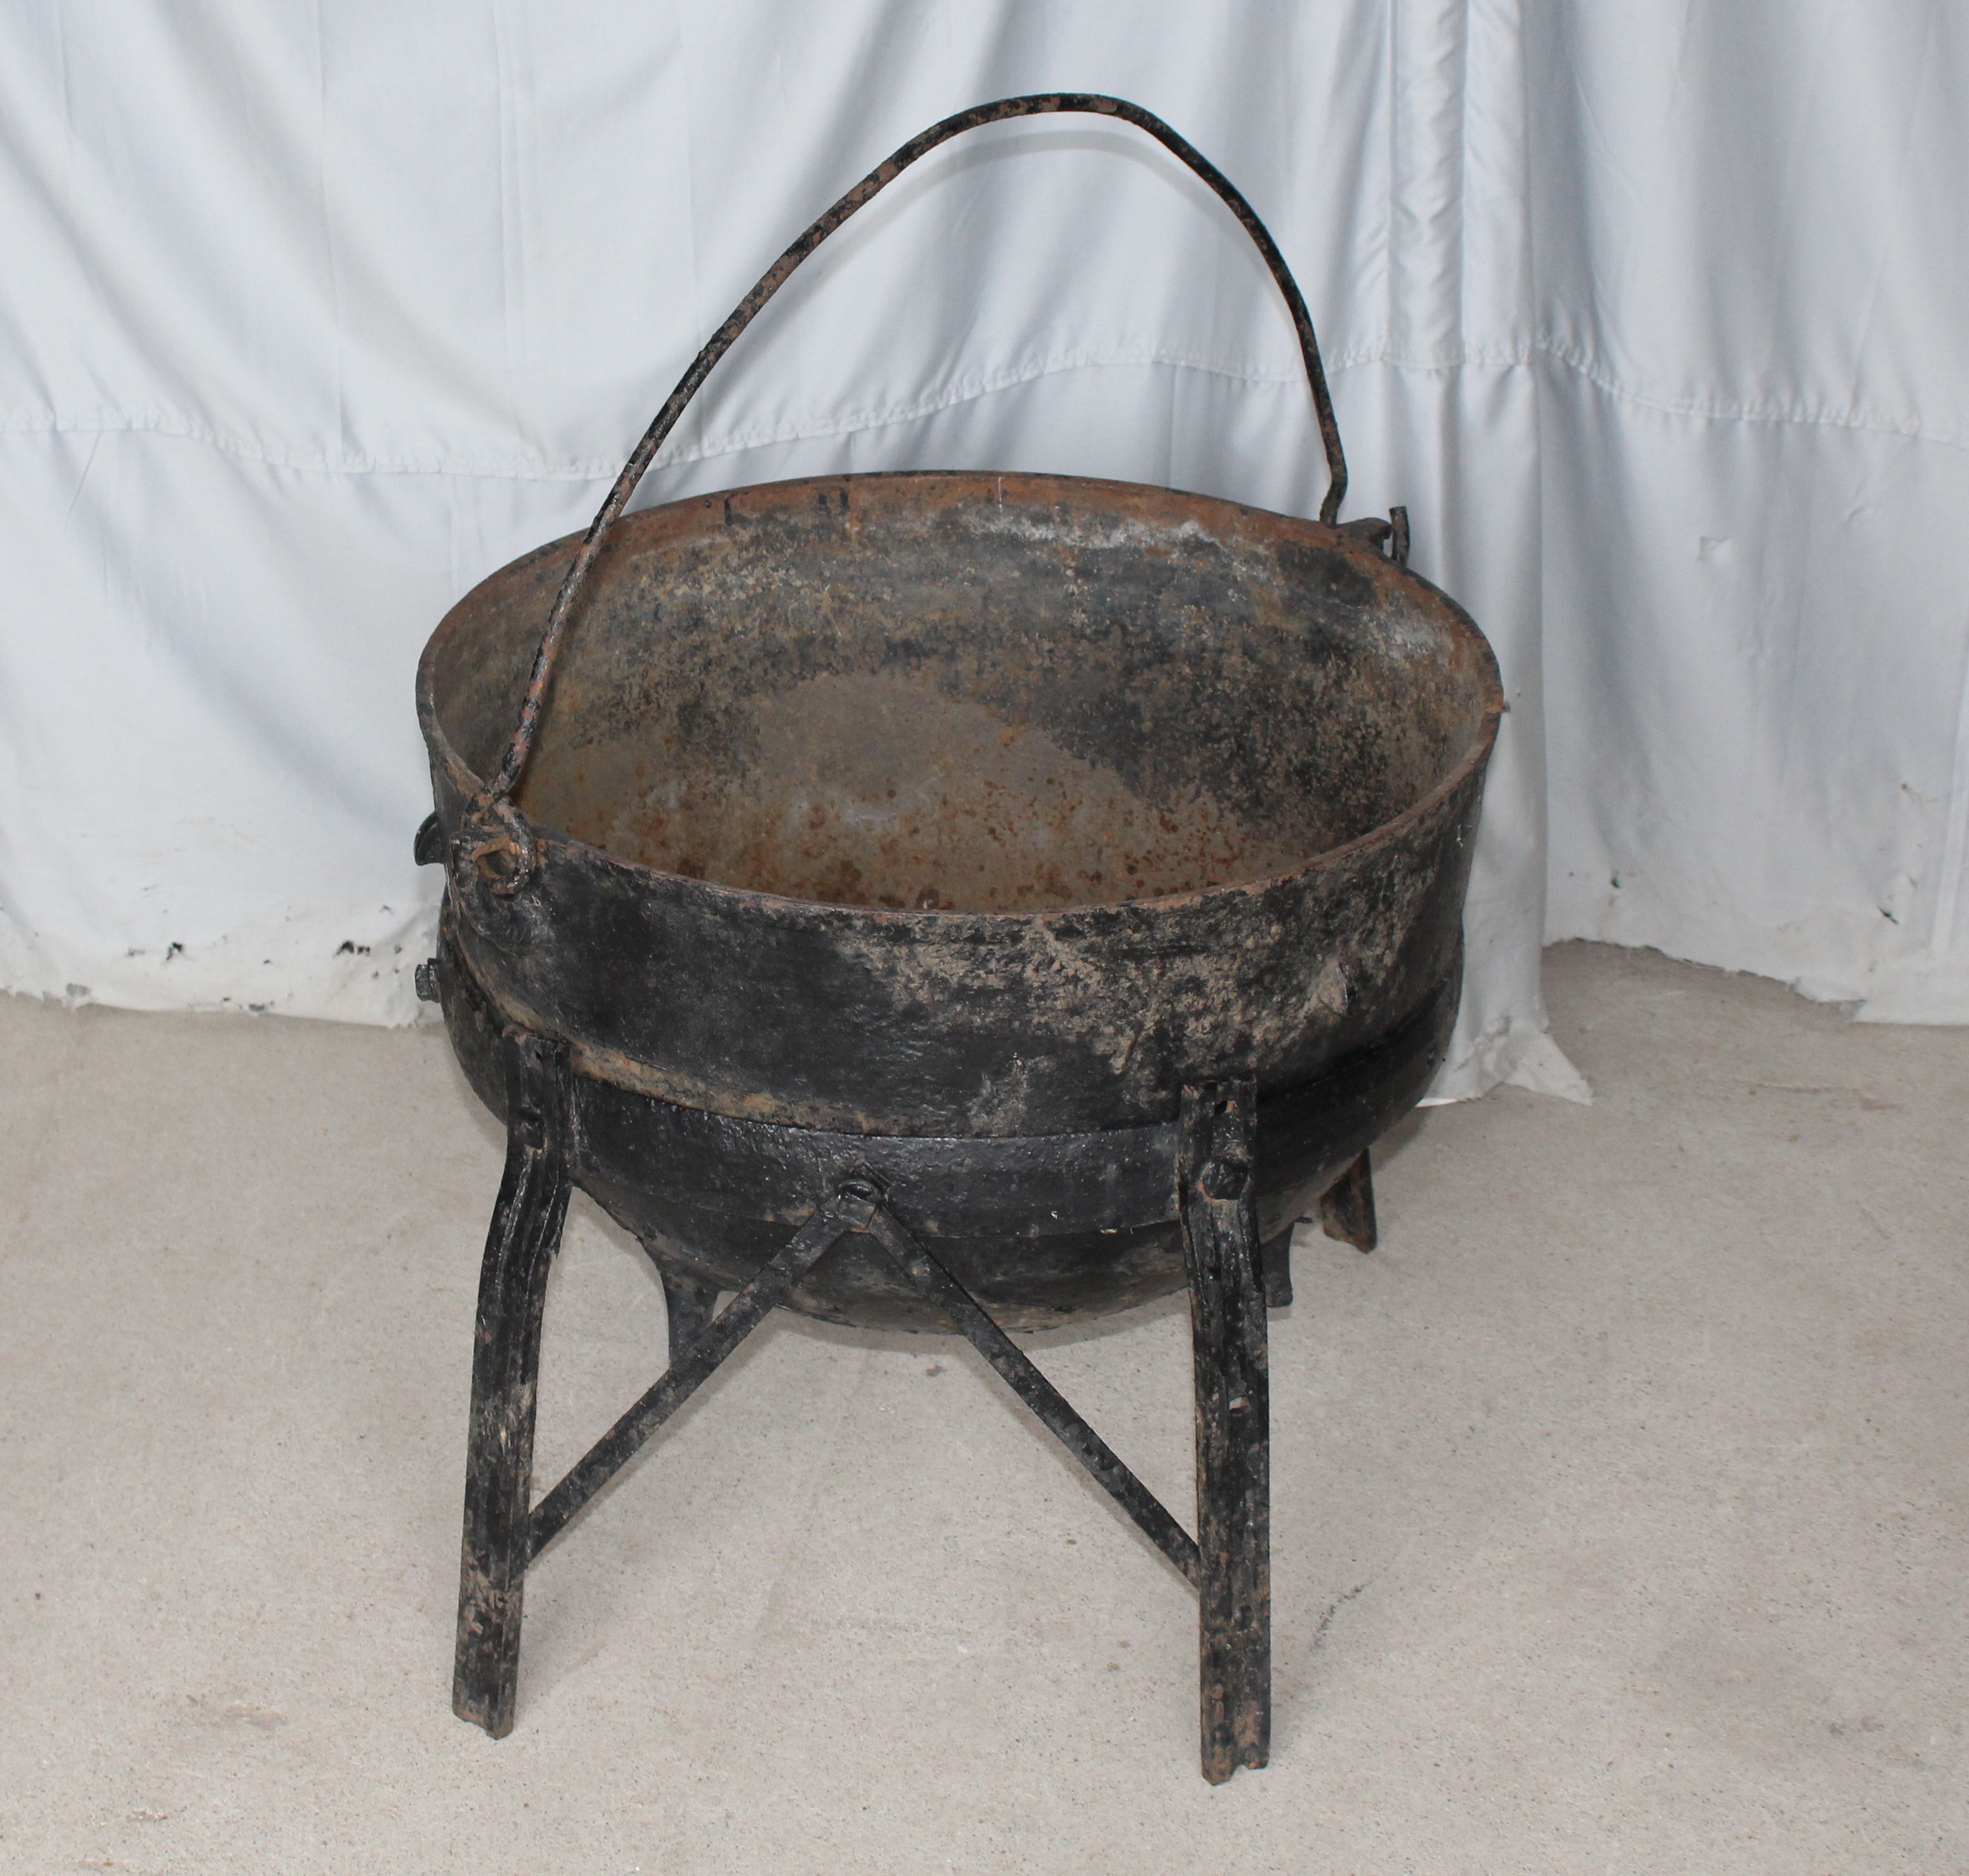 An Old Cast Iron Bowl